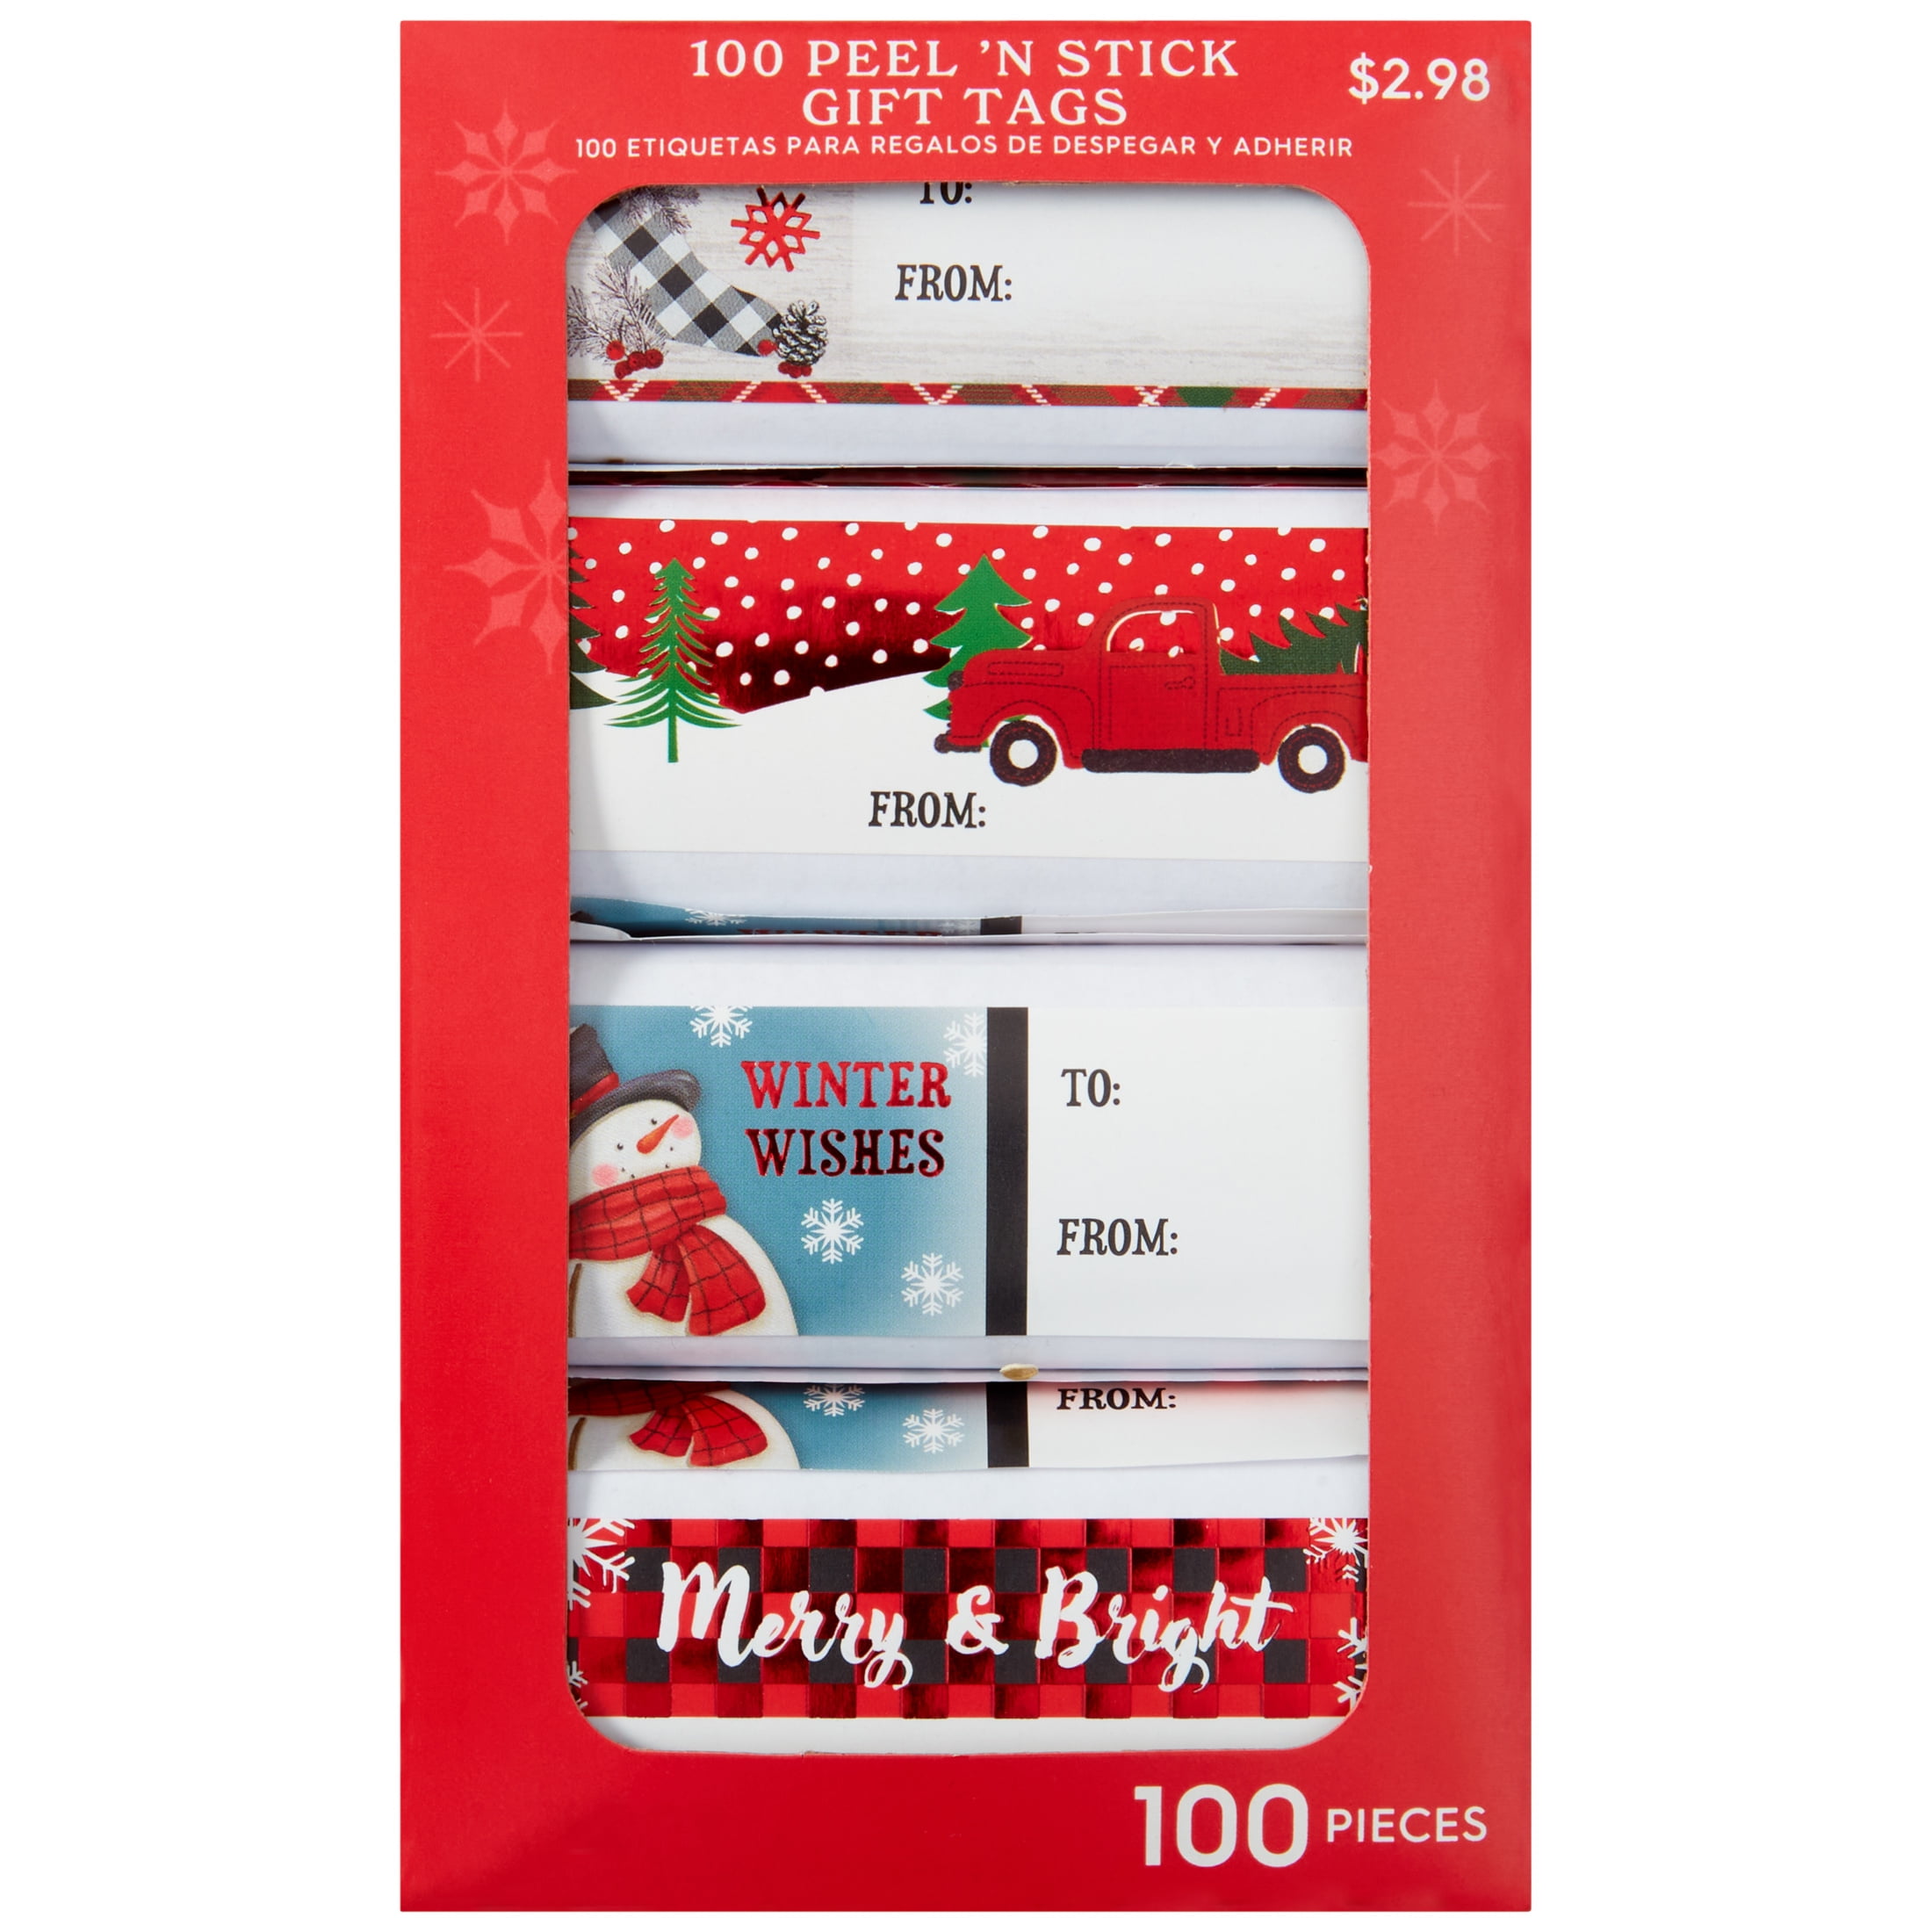 Holiday Time Merry & Bright Christmas Gift Tags, Red, White and Black Peel 'N Stick Labels, 100 Count